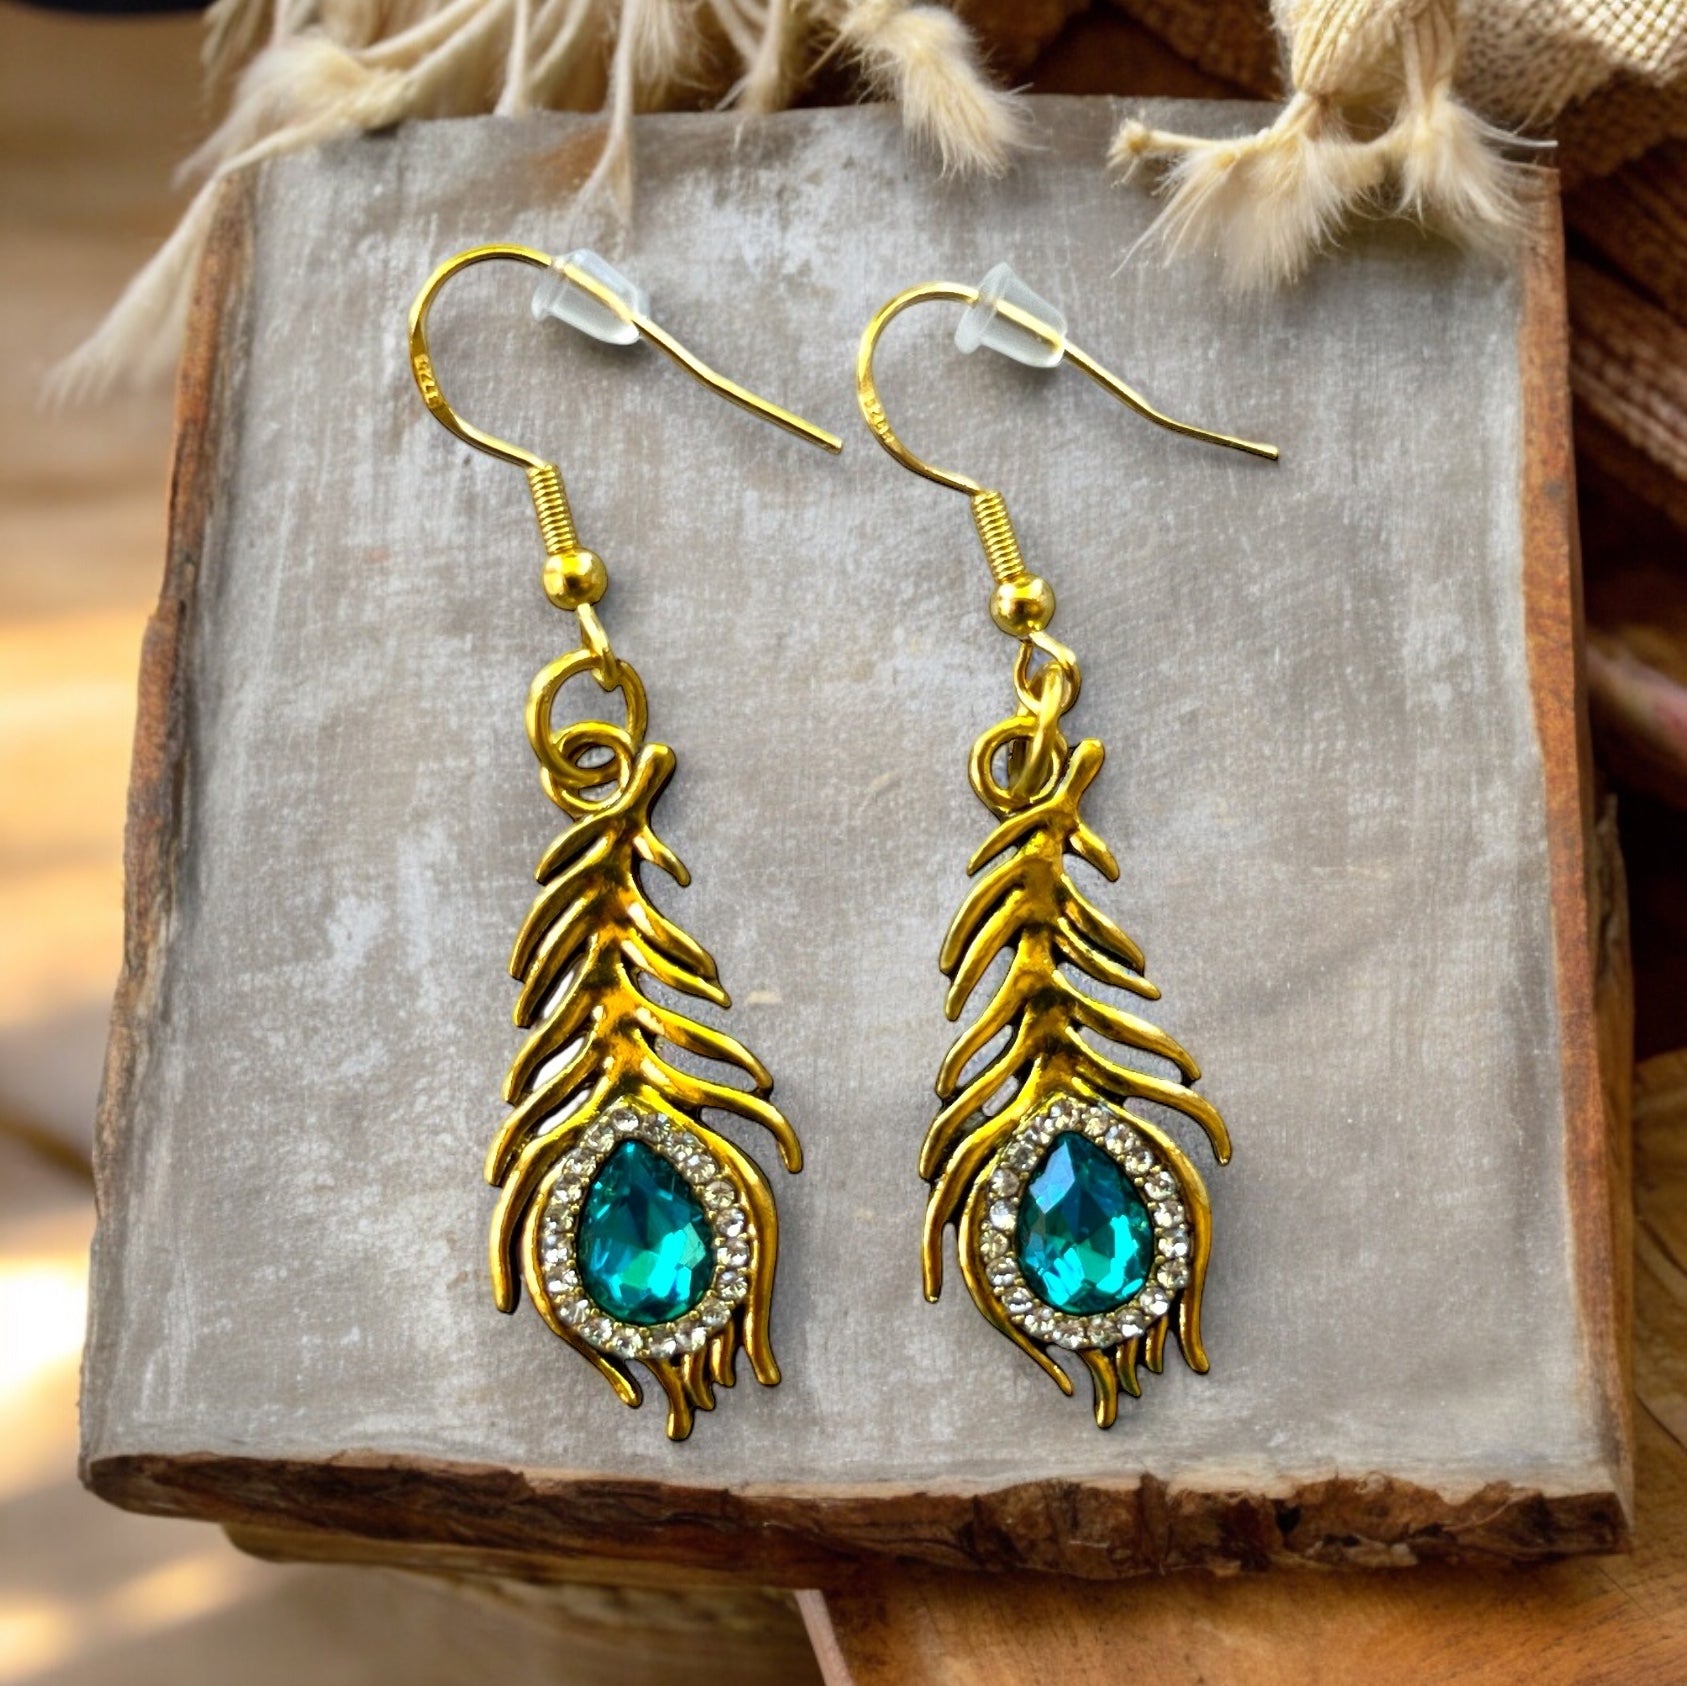 Gold Peacock Feather Dangle Earrings with Rhinestones: Elegant Eye-Catching Accessories